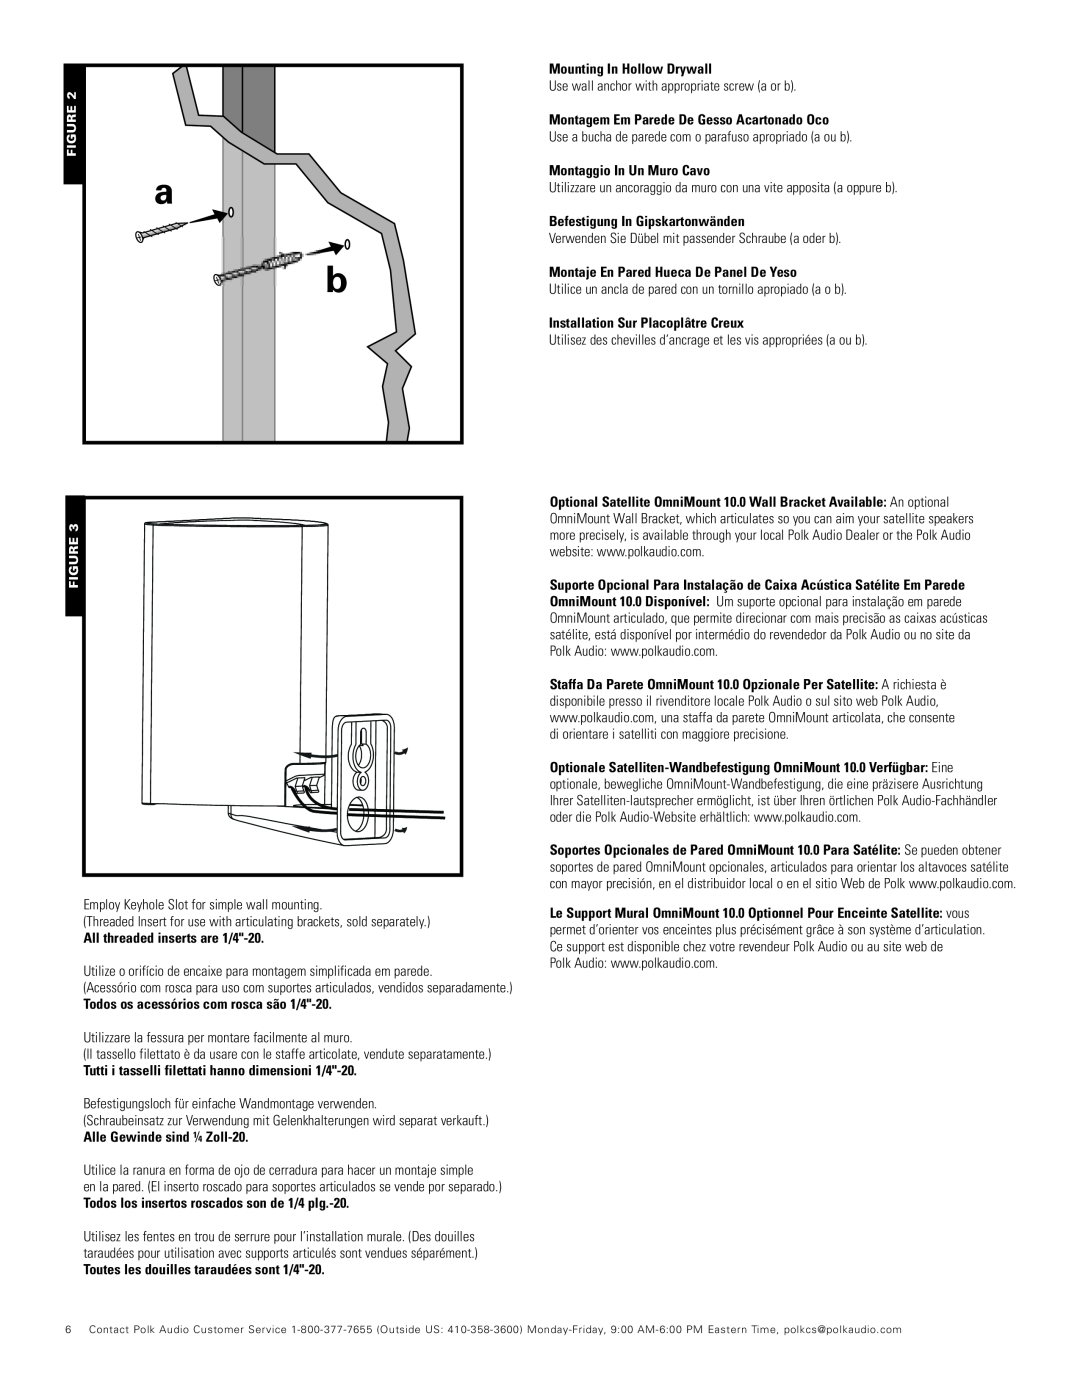 Polk Audio RM706 important safety instructions 